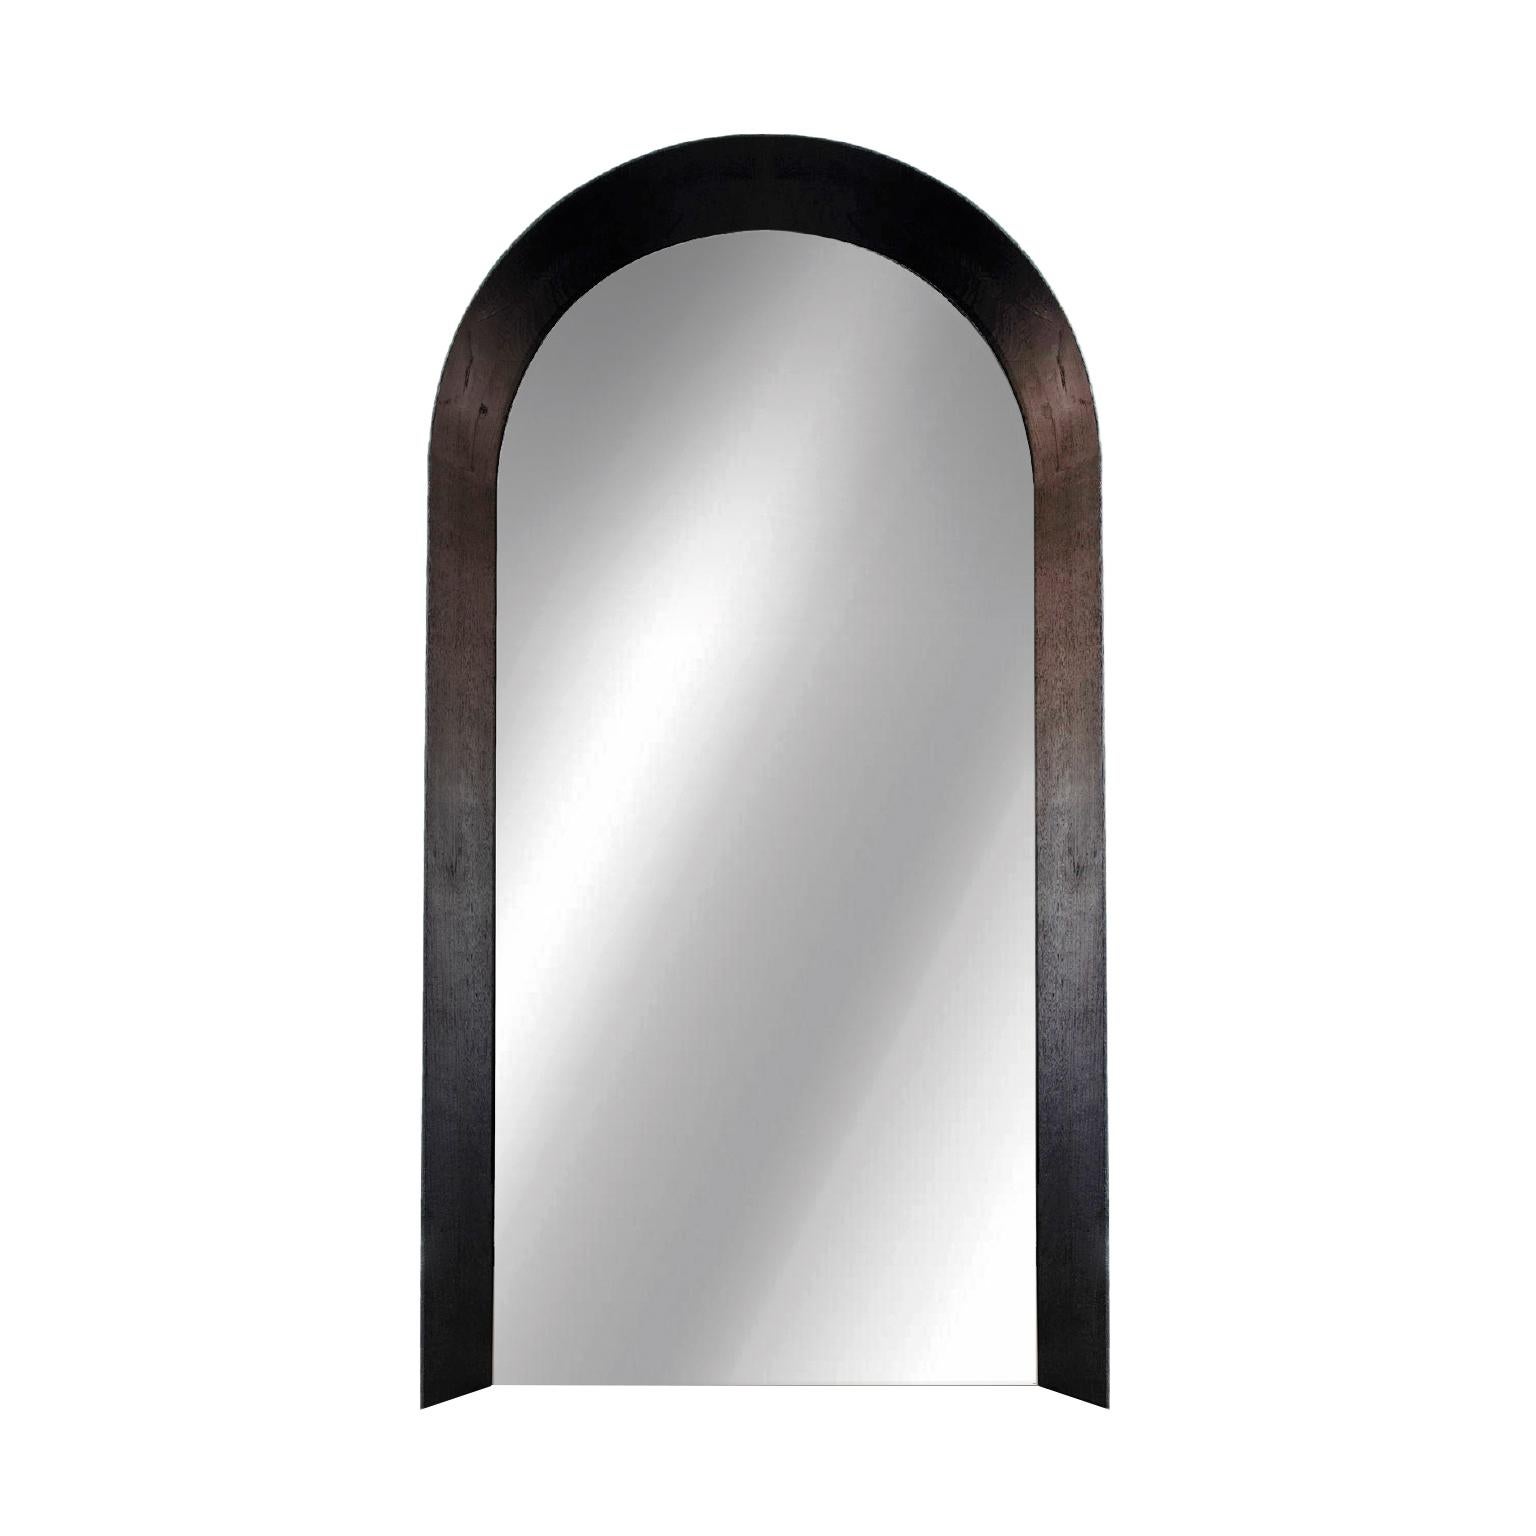 Gate full length mirror by Lagu 
Designed by Ufuk Ceylan
Dimensions: W 112 D 20 x H 225 cm.
Materials: Mirror, wood.

Gate full length mirror. It opens a magnificent door for you to create a more aesthetic connection with your own